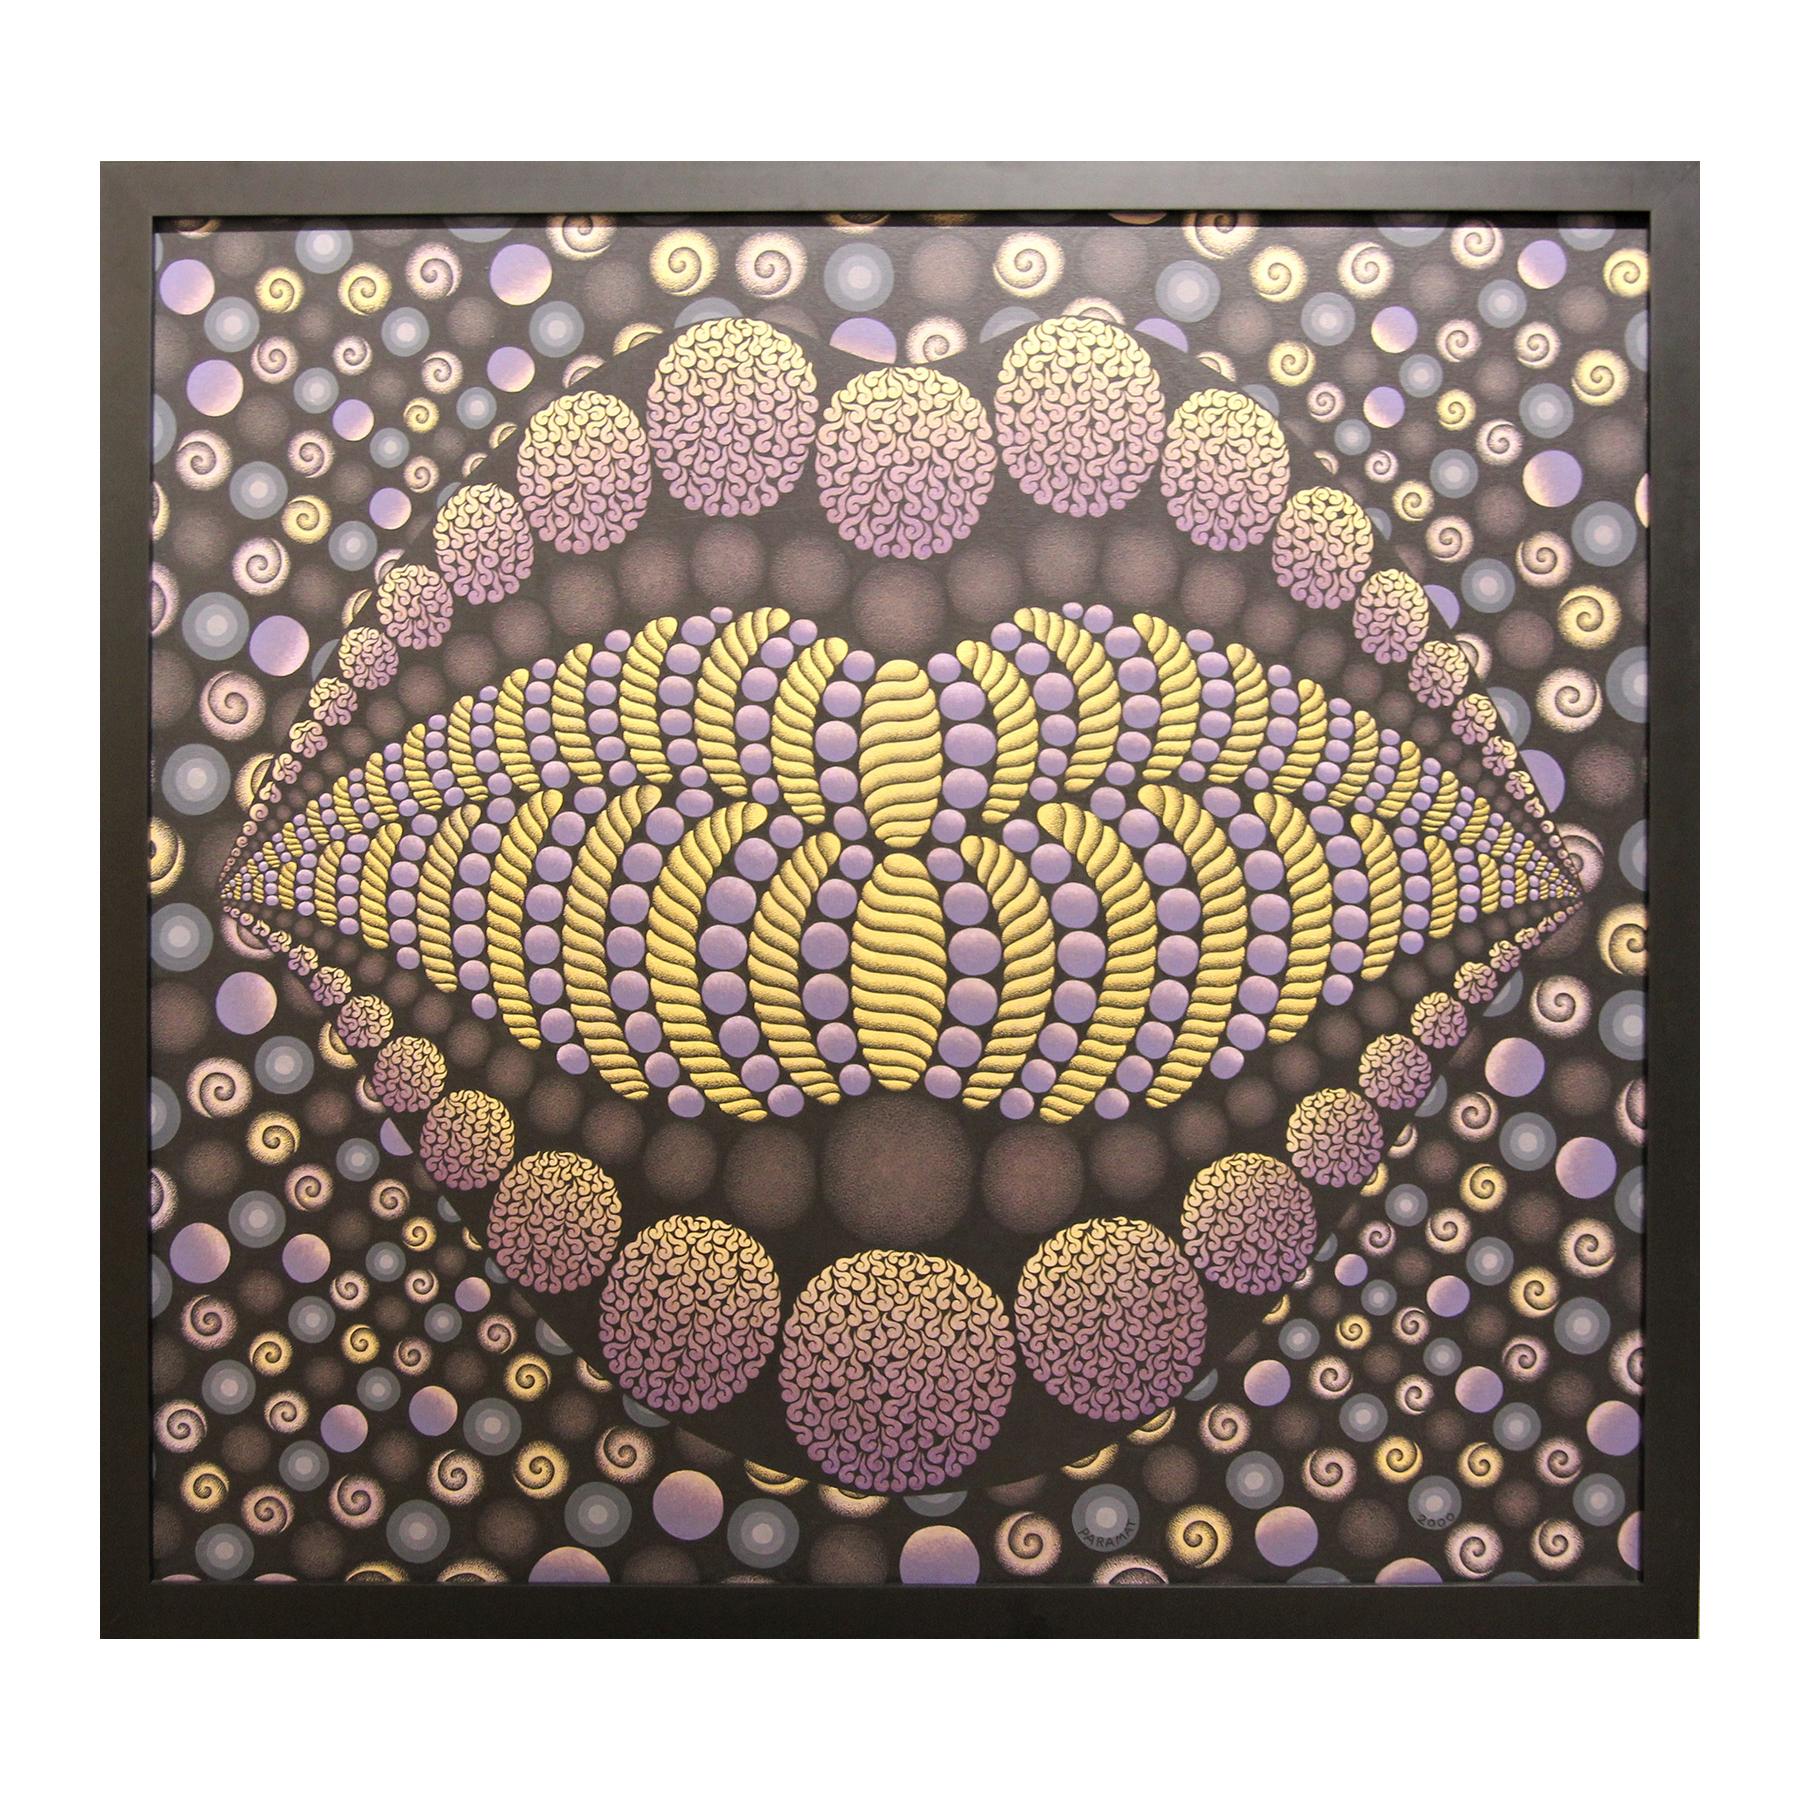 Paramat Lueng-On Figurative Painting - “Big Mouth / Emotions” Rich Gold and Purple Abstract Geometric Op Art Painting